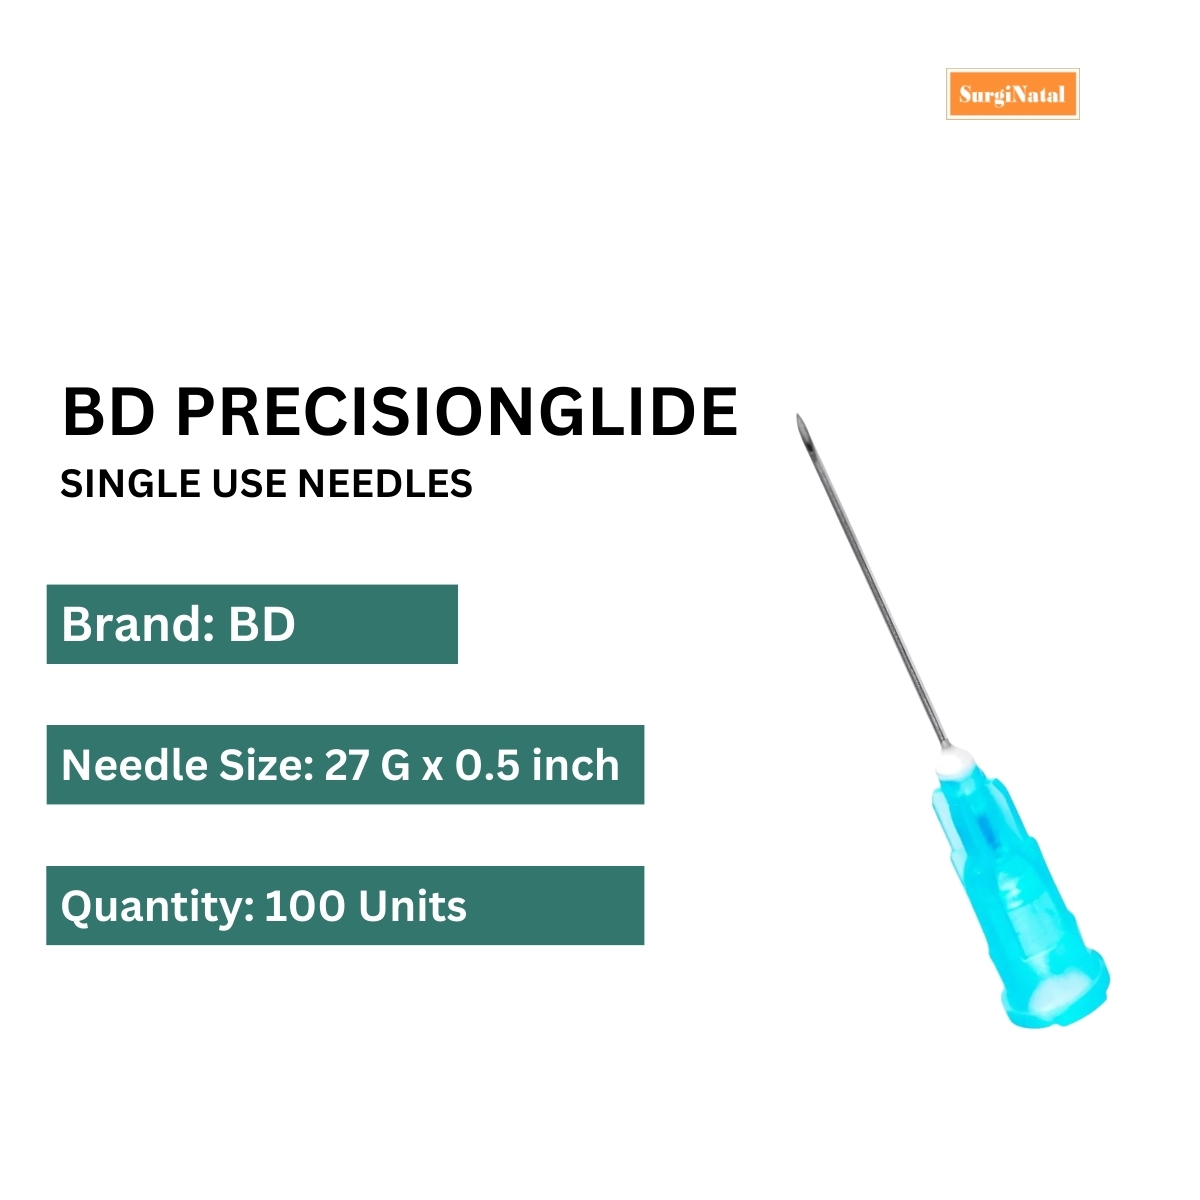 bd needles precisionglide 27g*0.5 inch - 100 units pack